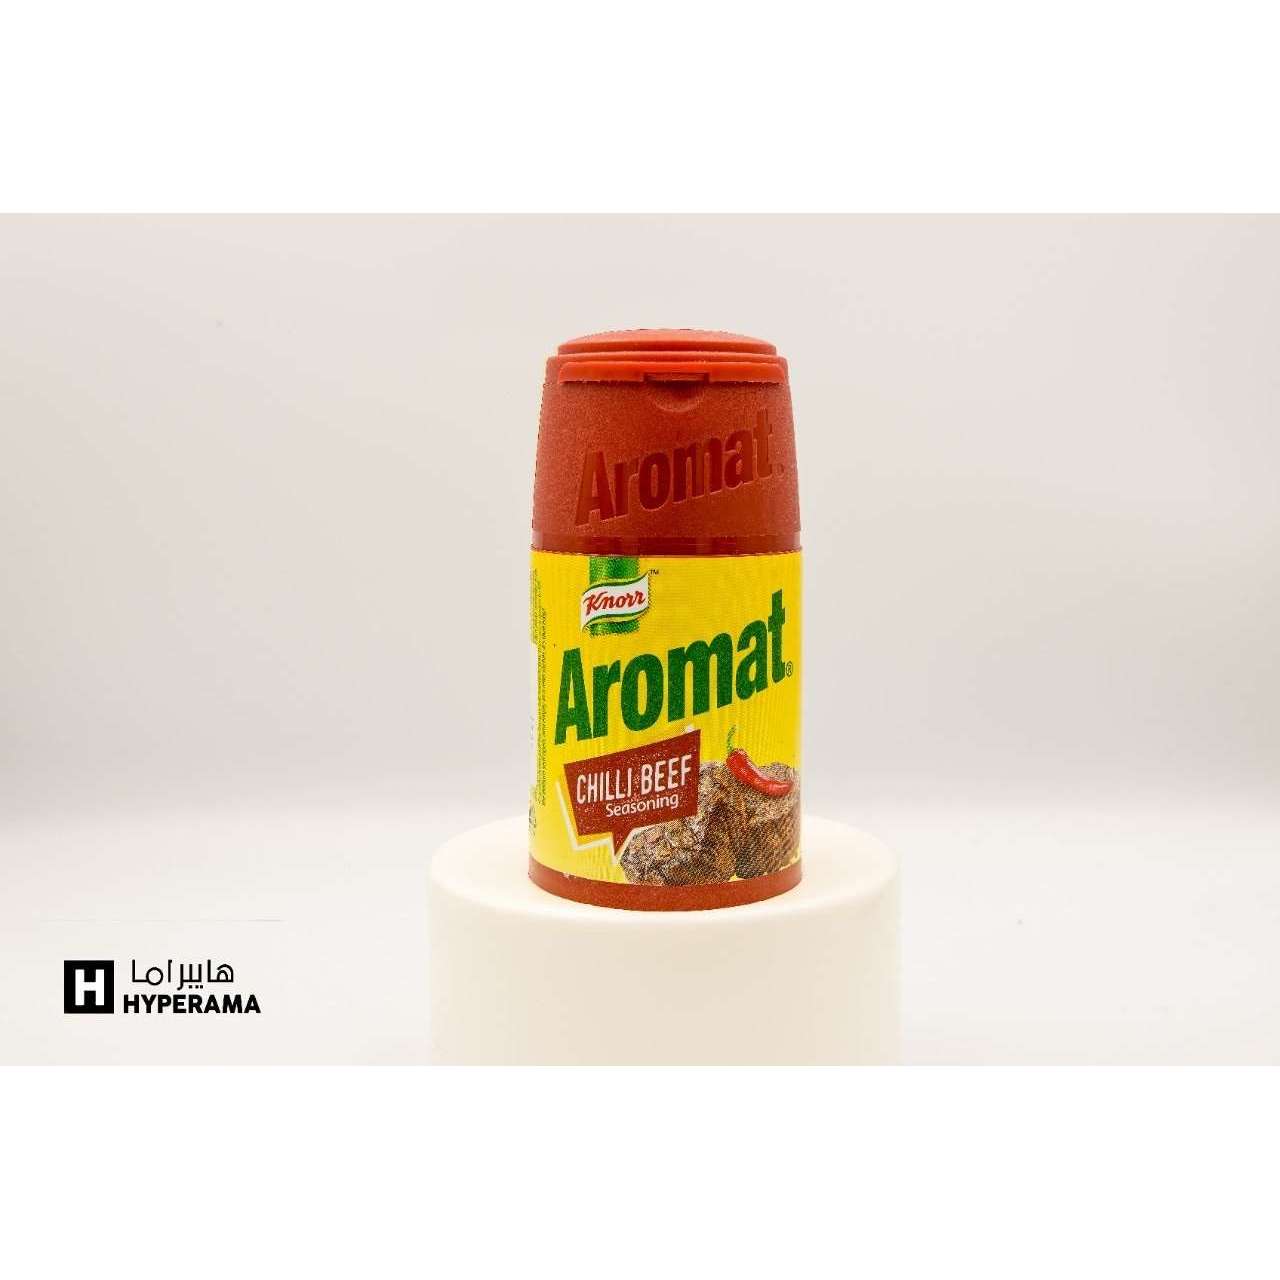 KNORR AROMAT CHILLI BEEF 75G